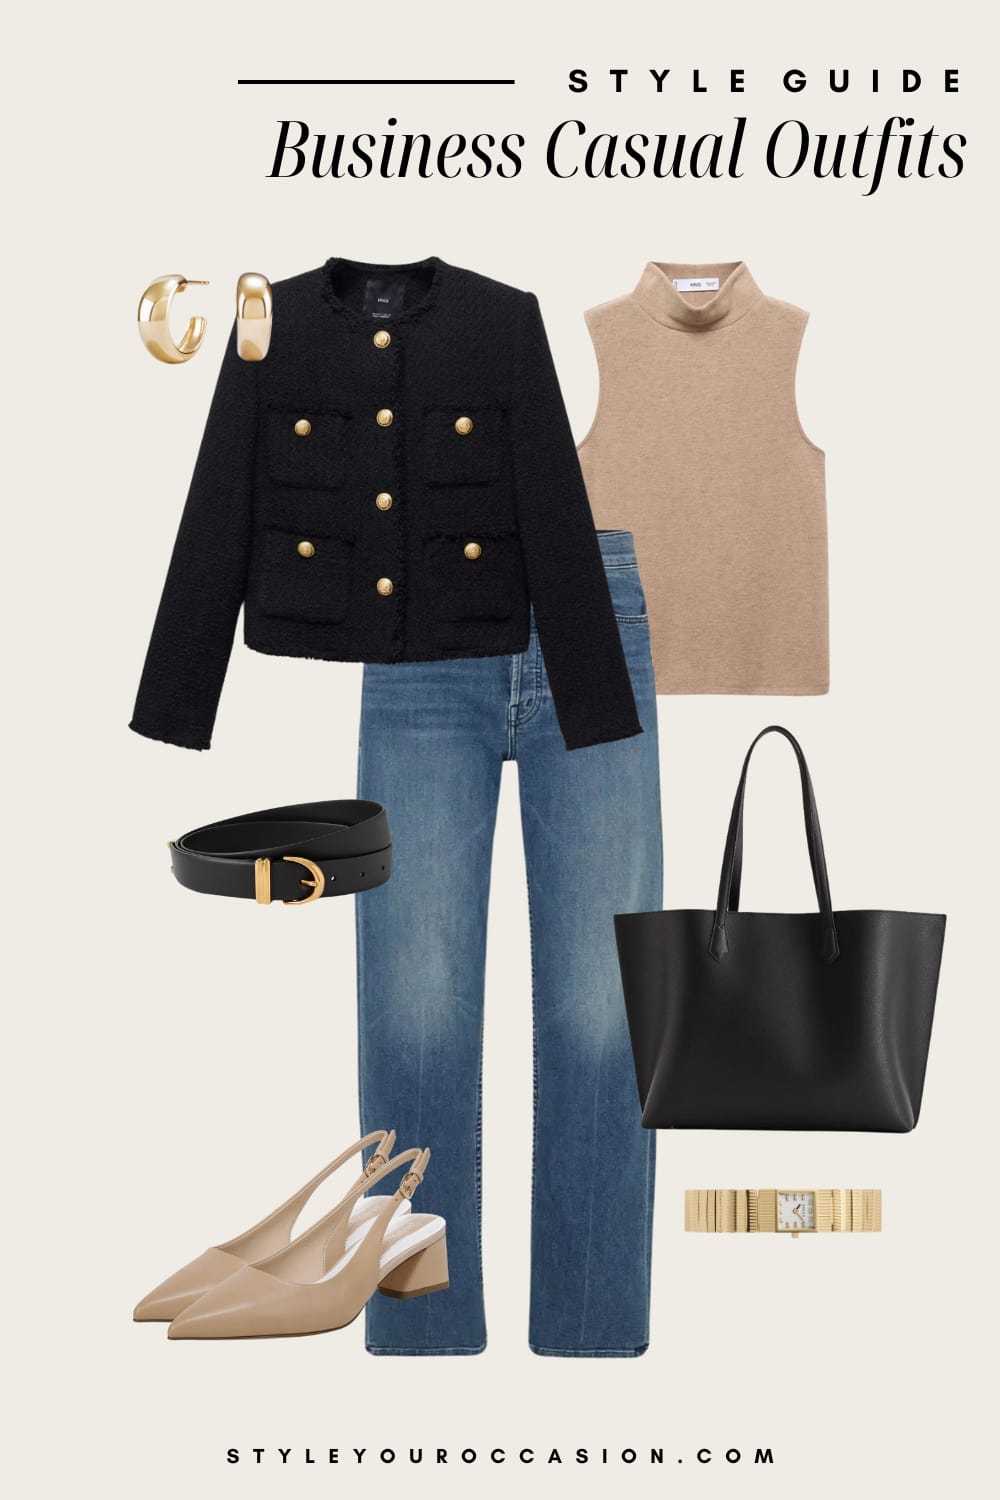 an image board of a business casual outfit featuring blue jeans, a camel turtleneck tee, a black lady jacket, beige slingback heels, and black and gold accessories